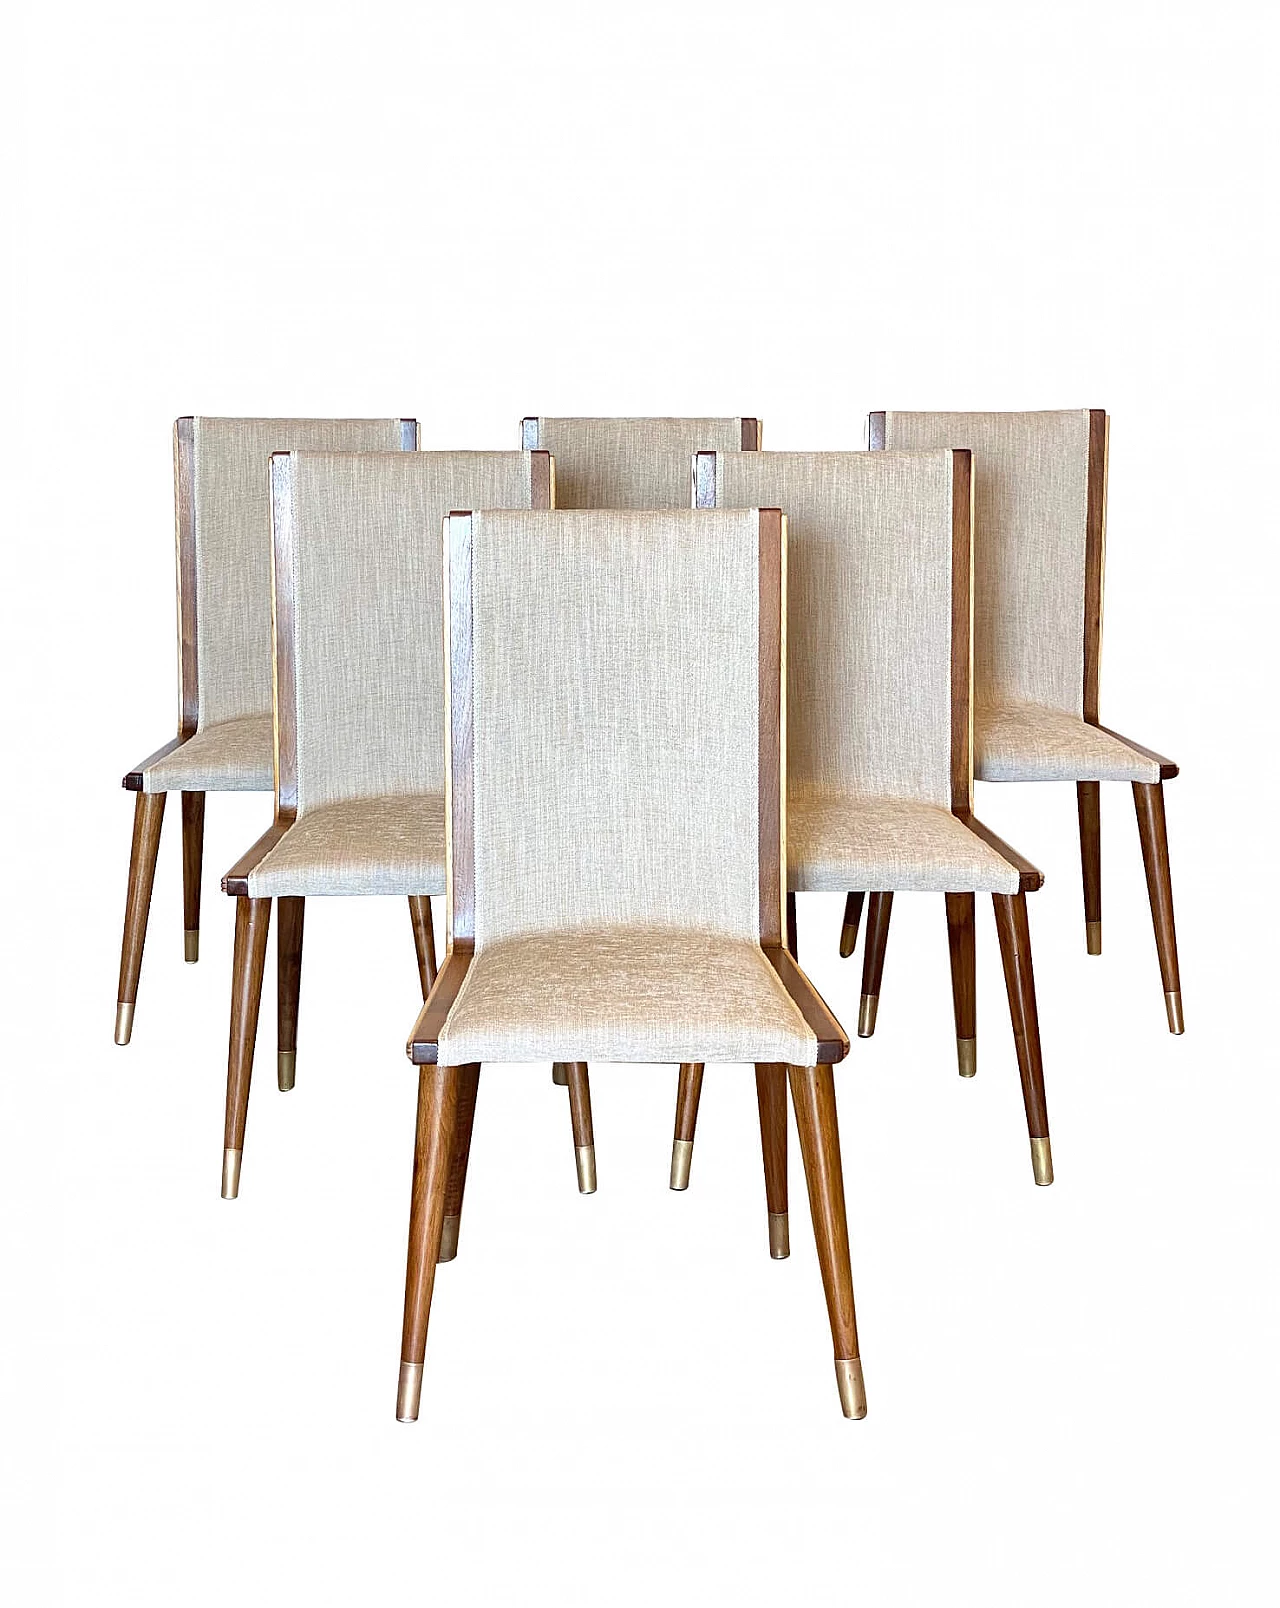 6 Chairs in walnut and ash, 1950s 1212699